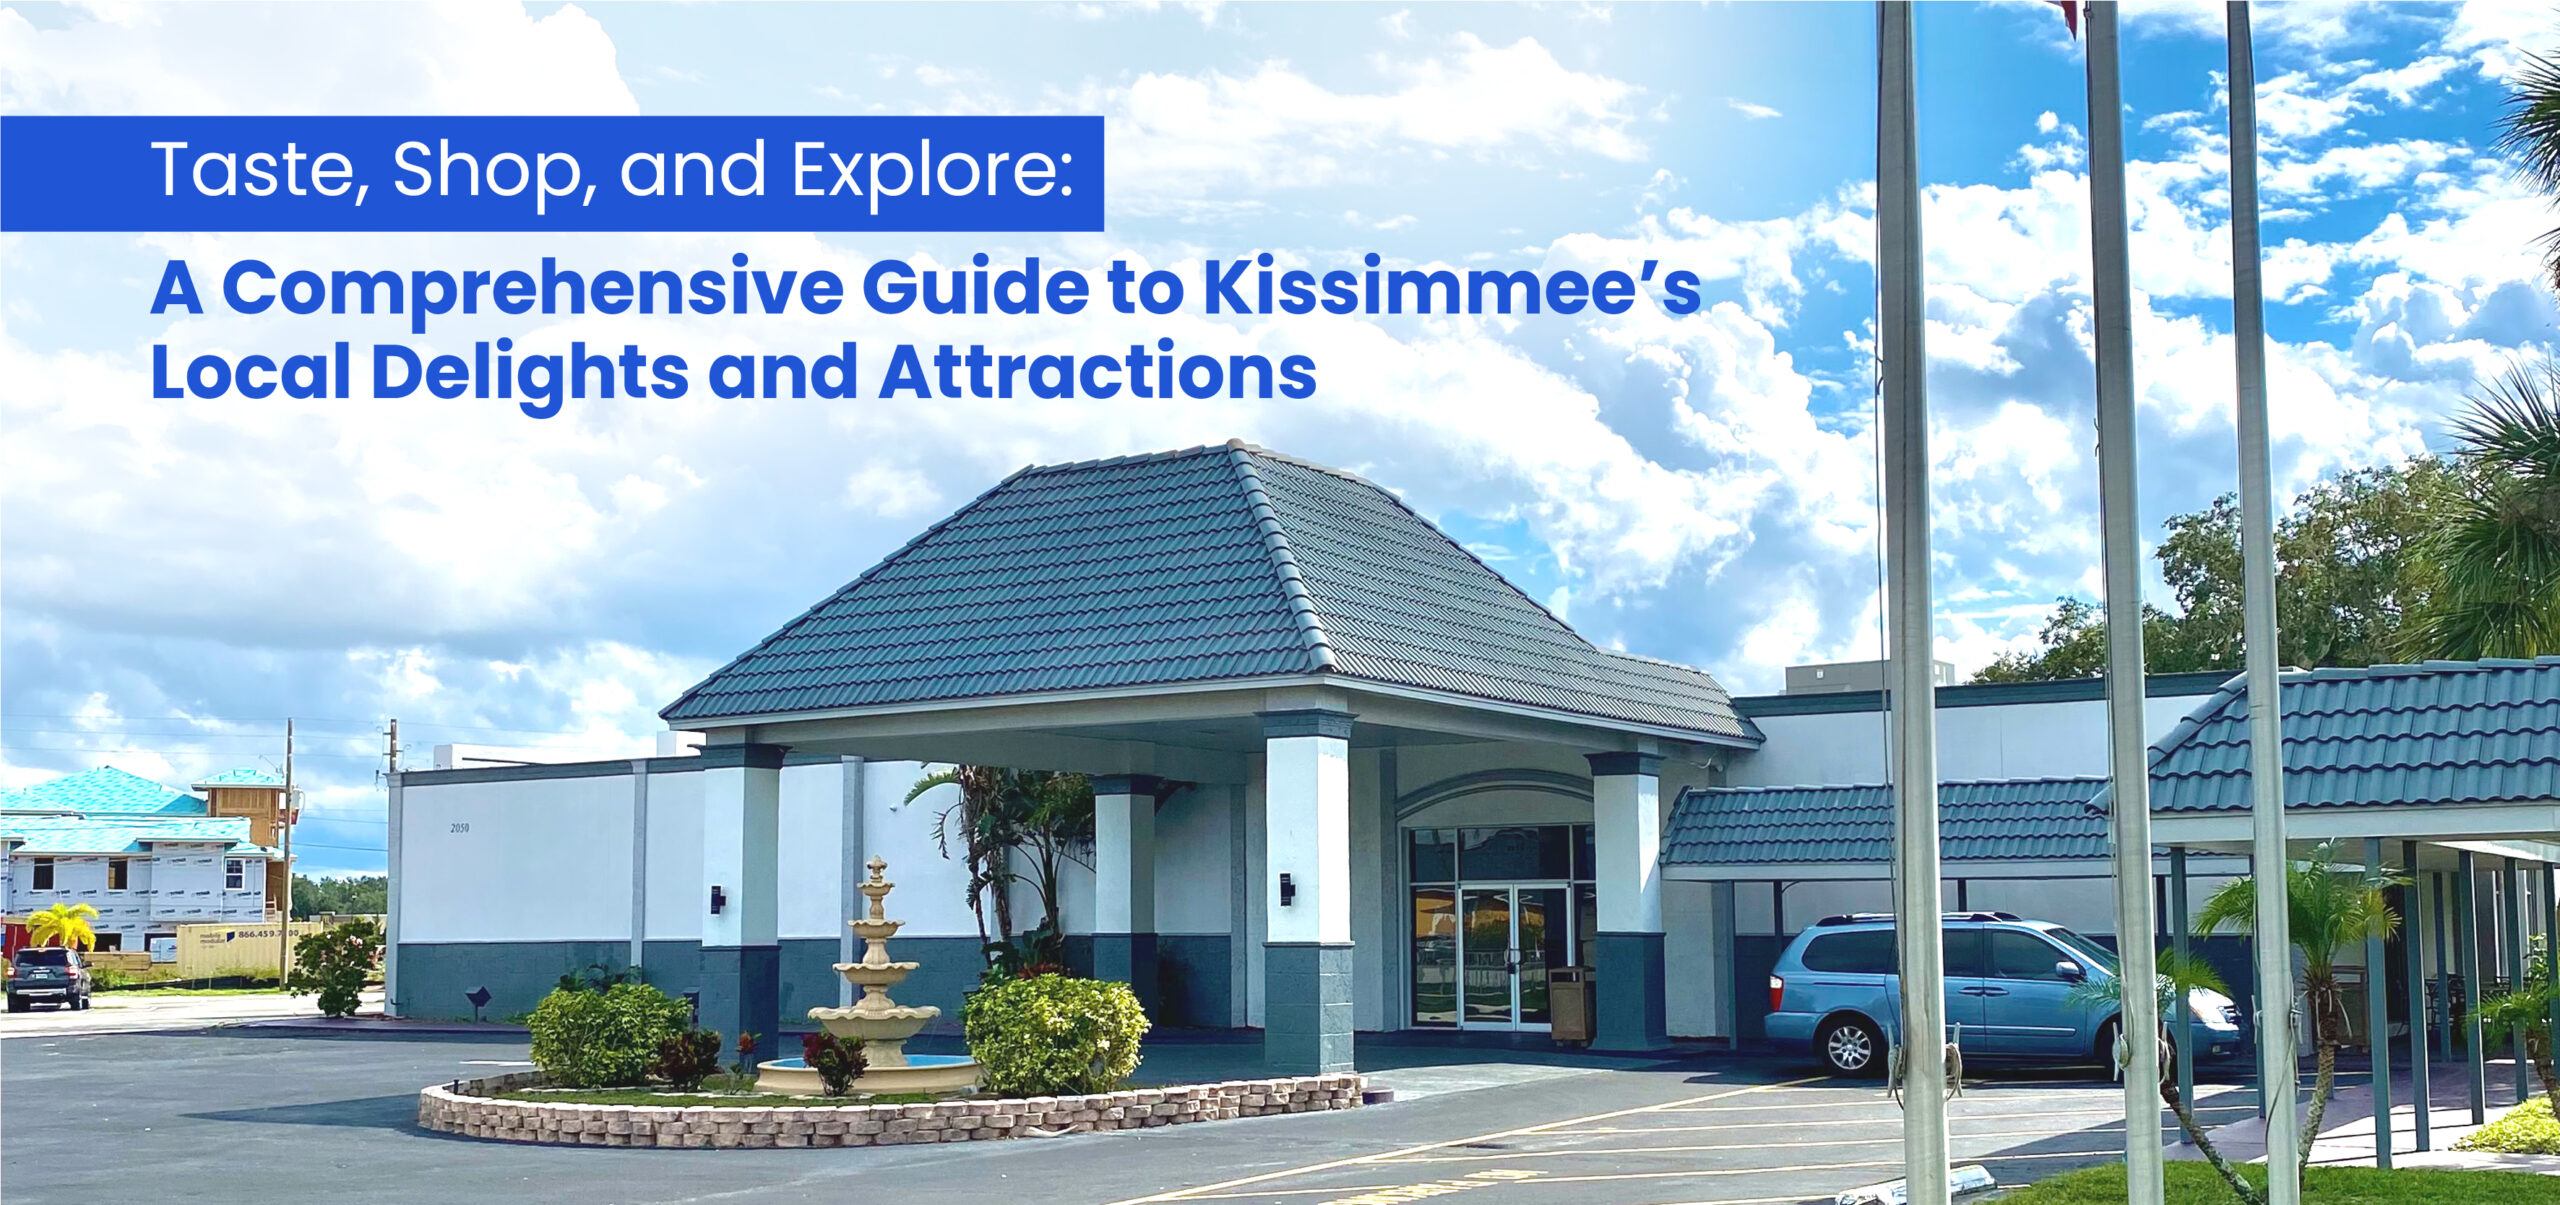 Taste, Shop, and Explore: A Comprehensive Guide to Kissimmee’s Local Delights and Attractions